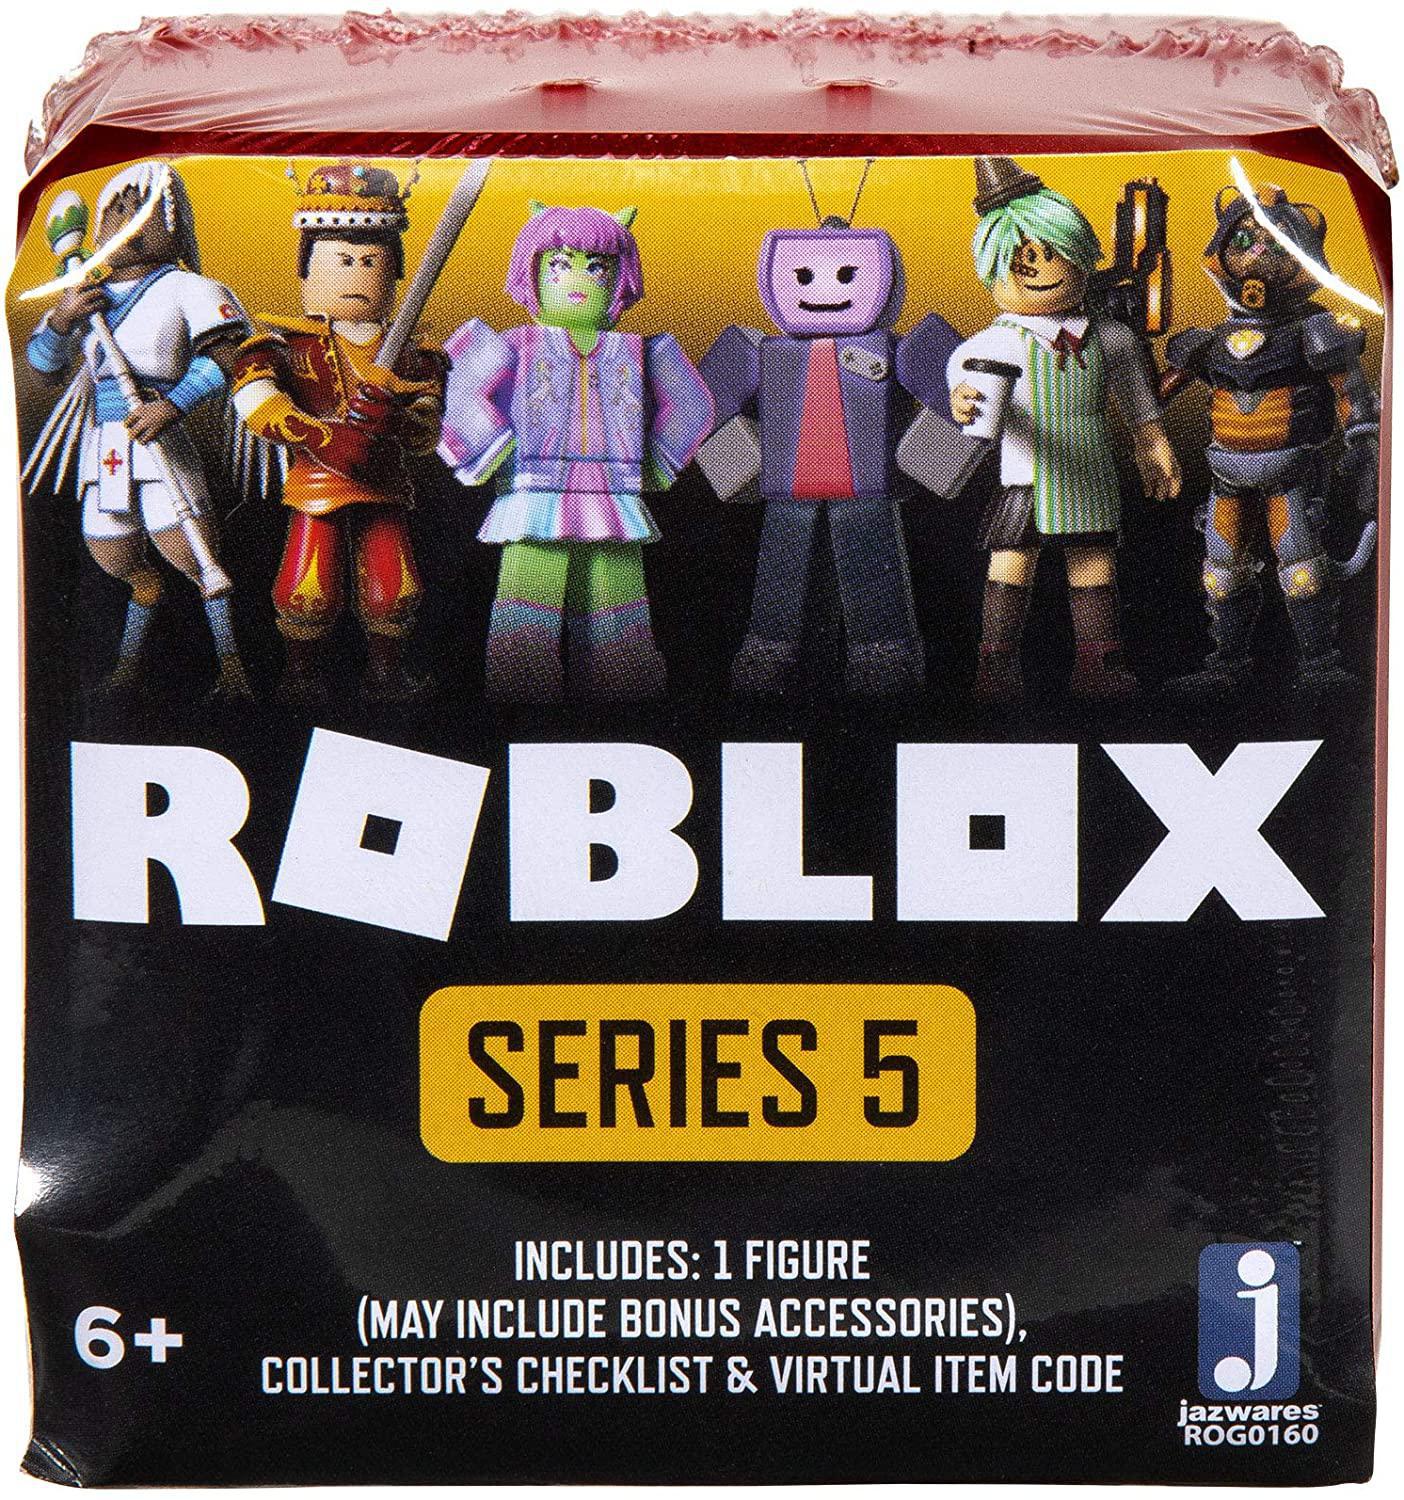 Roblox Toys Play Set Lot Of 5 random mix Action Figures NO CODES